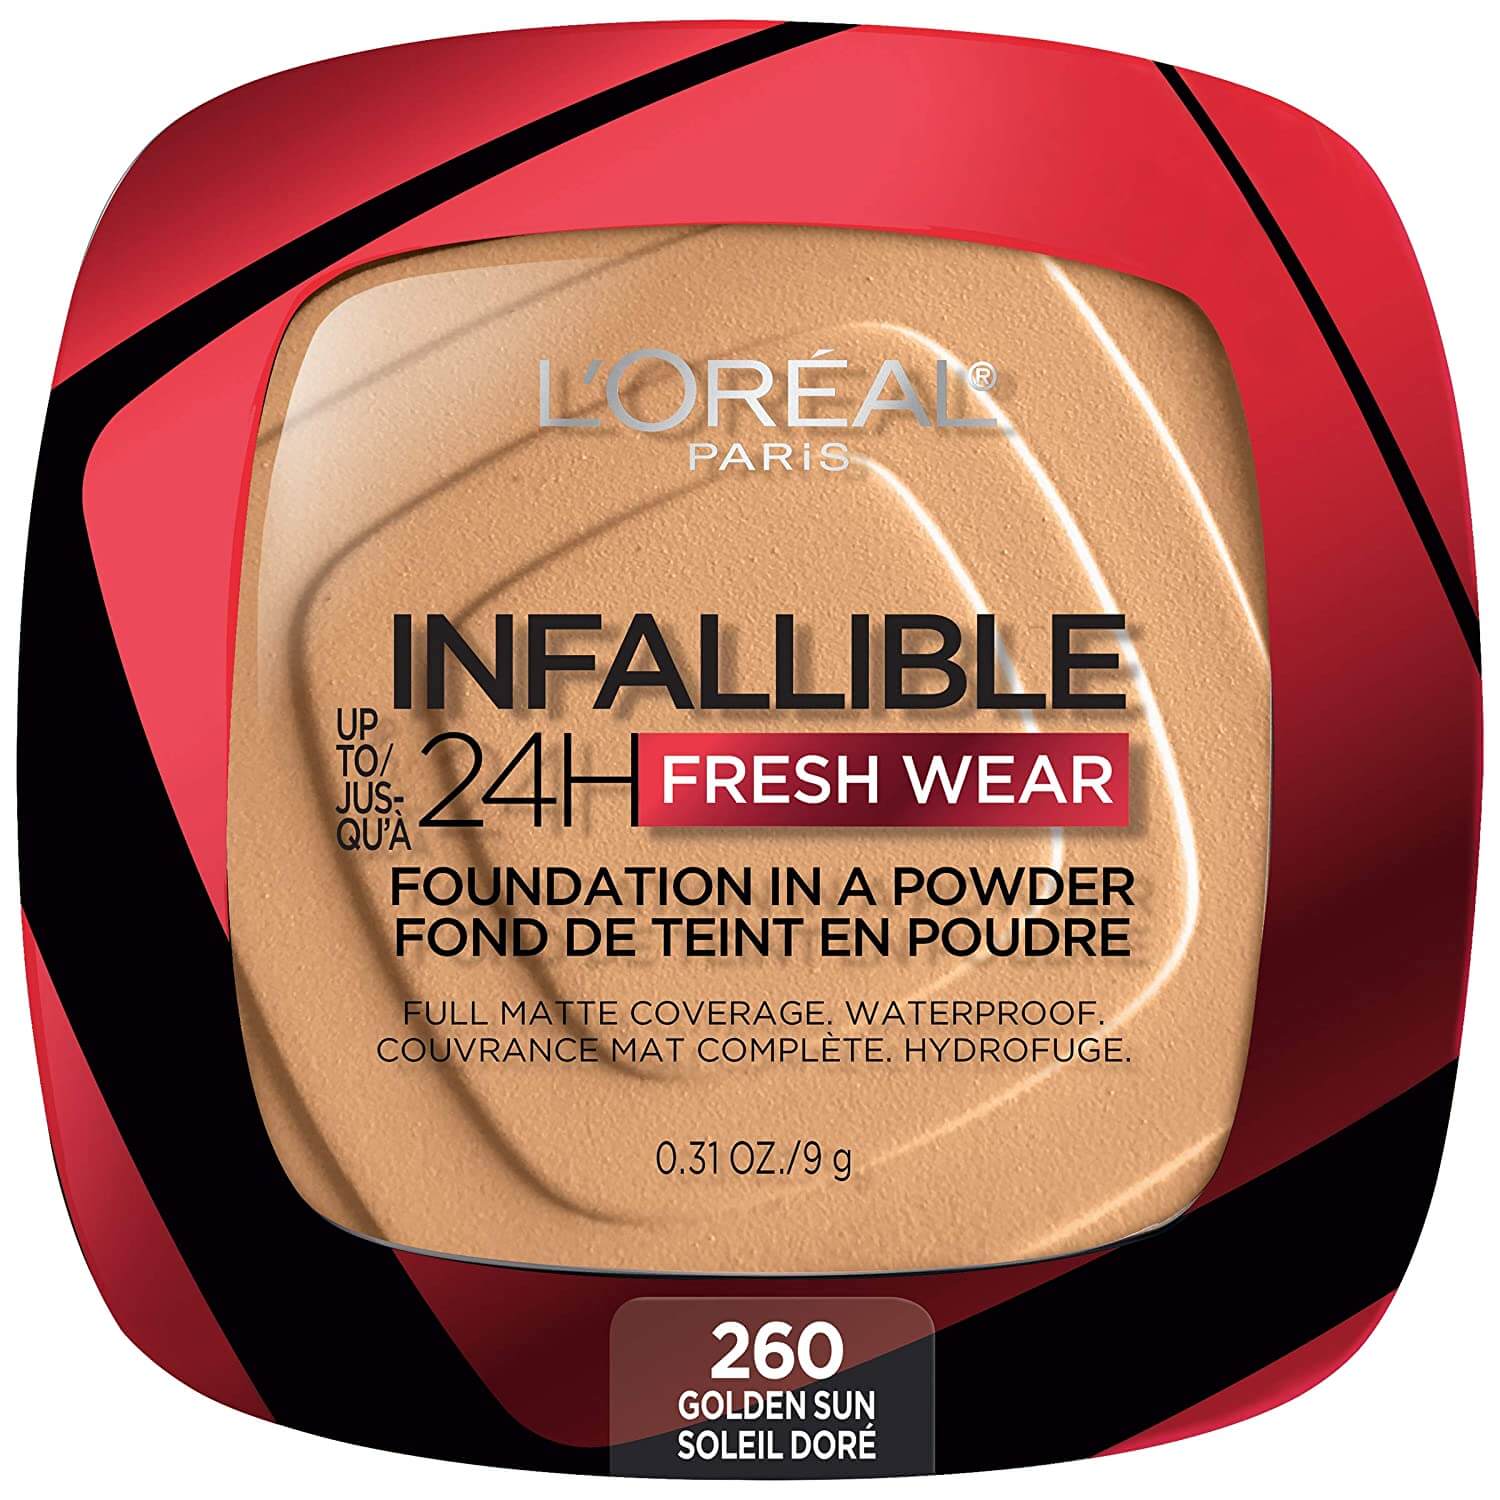 L'Oréal Paris Infallible Fresh Wear Up To 24H Foundation in a Powder